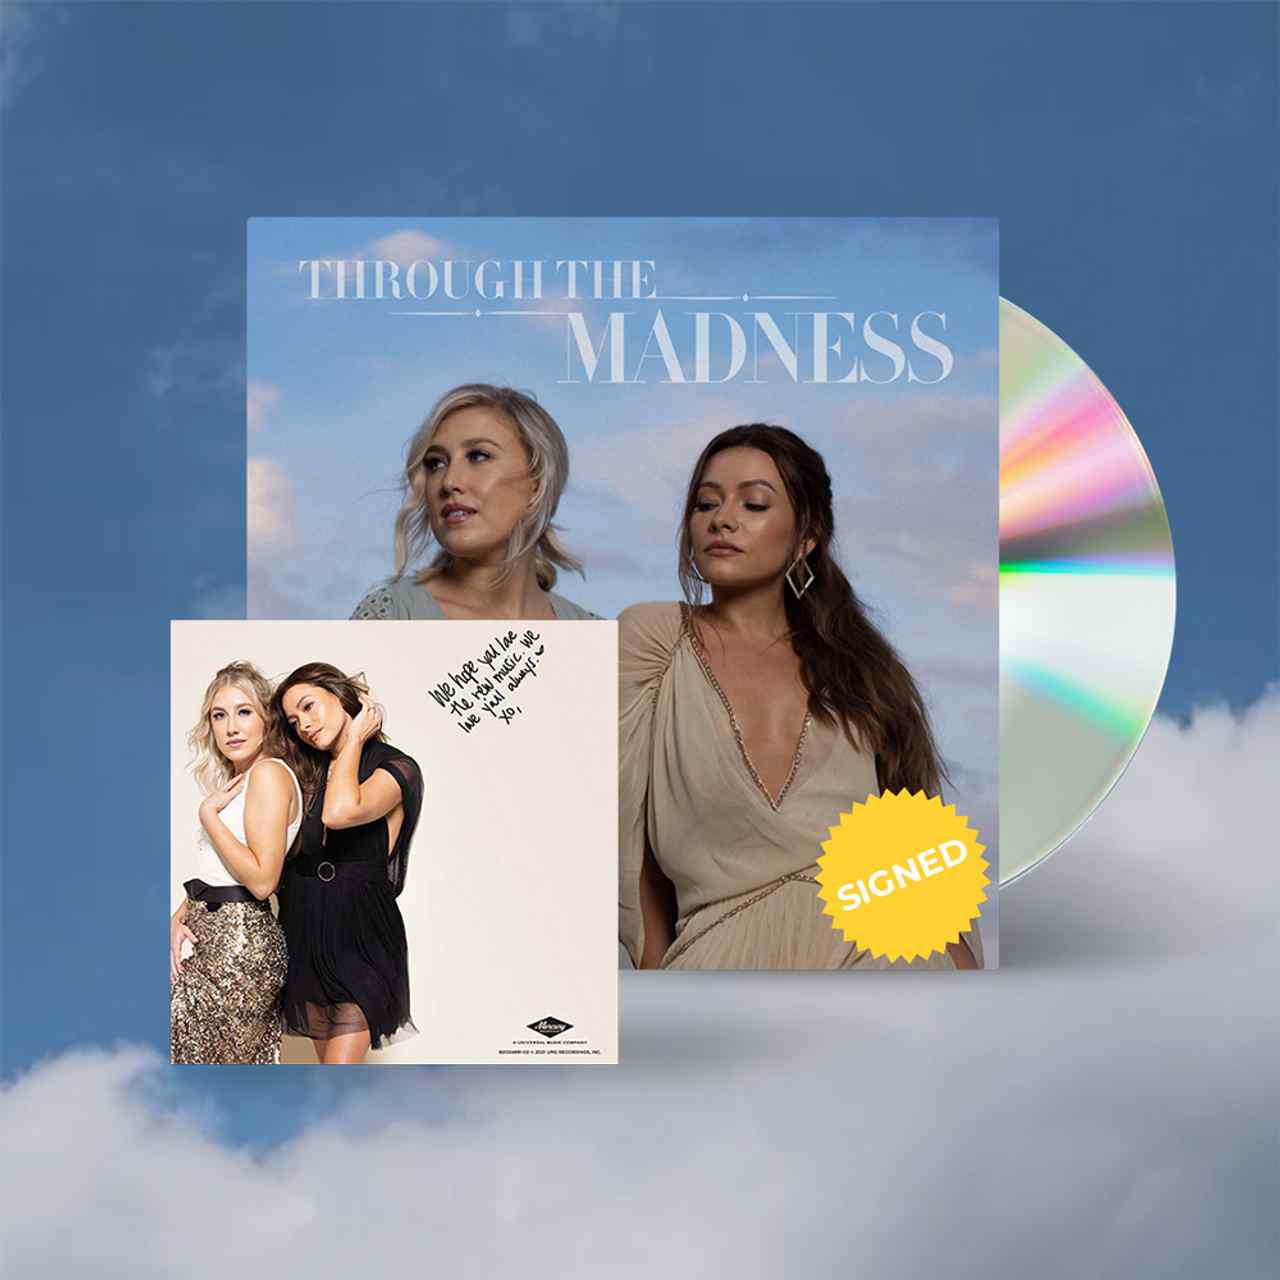 Join the FREE Maddie & Tae Fan Club and receive $2 off the new 'Through the Madness, Vol. 1' EP!